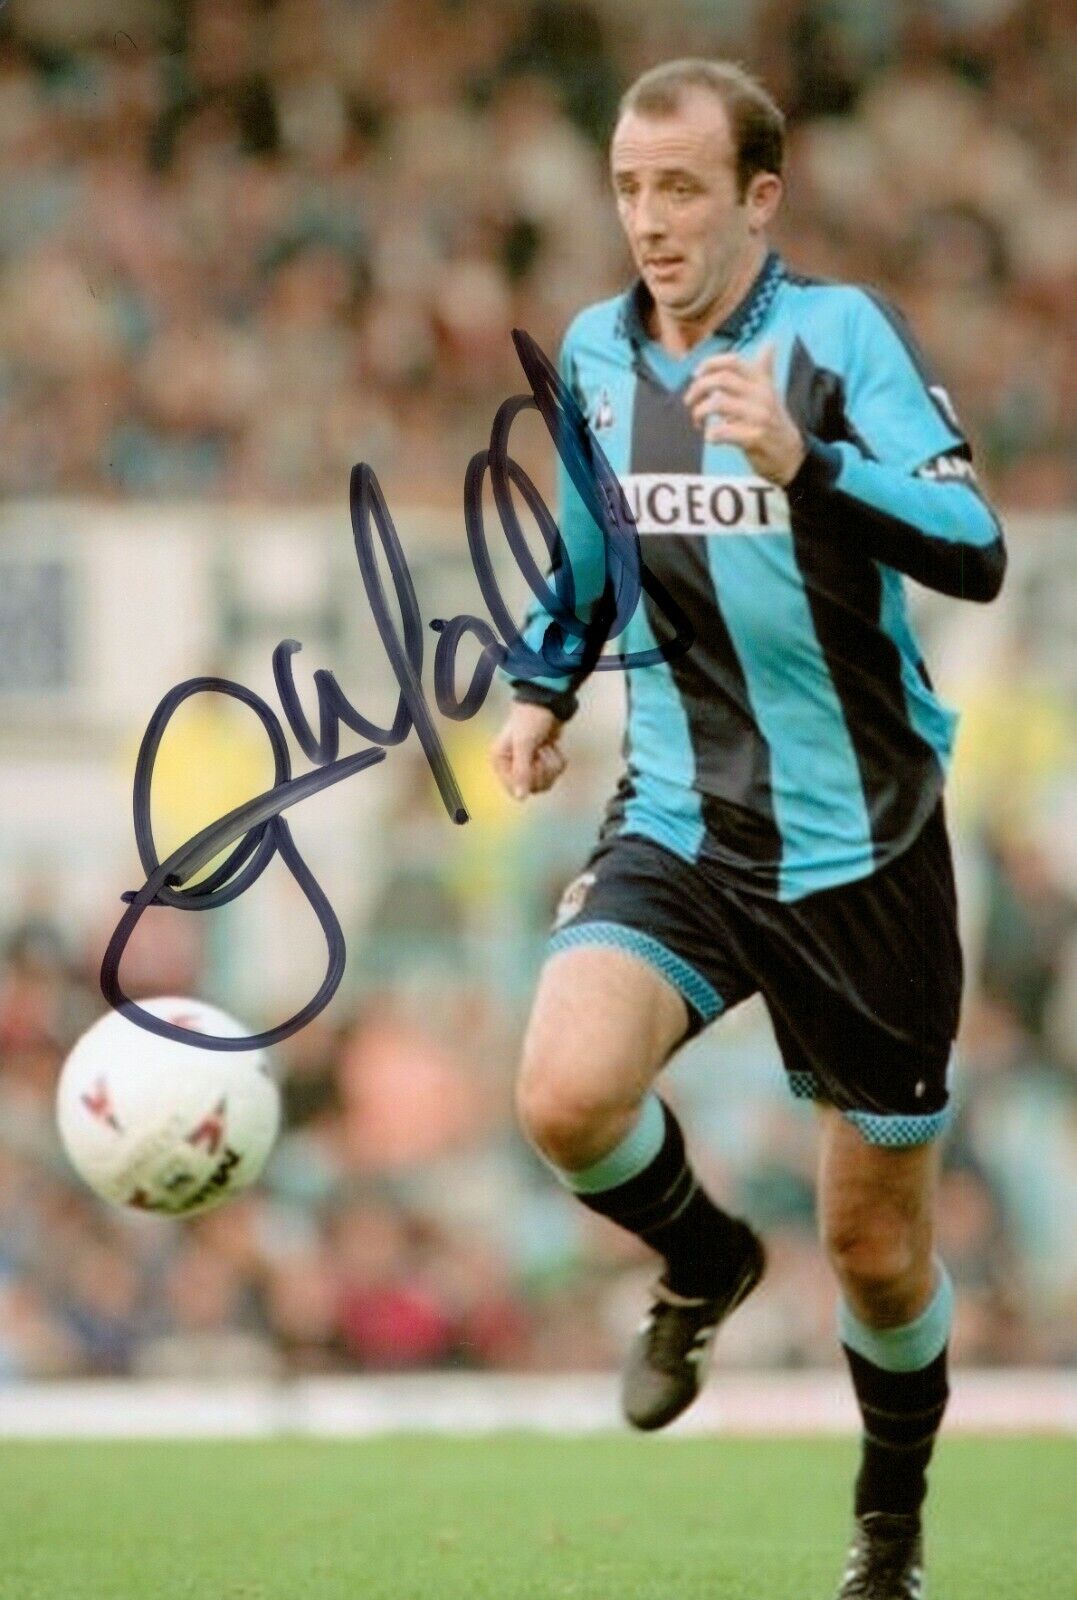 Gary McAllister Signed 6x4 Photo Poster painting Coventry Leeds United Liverpool Autograph + COA